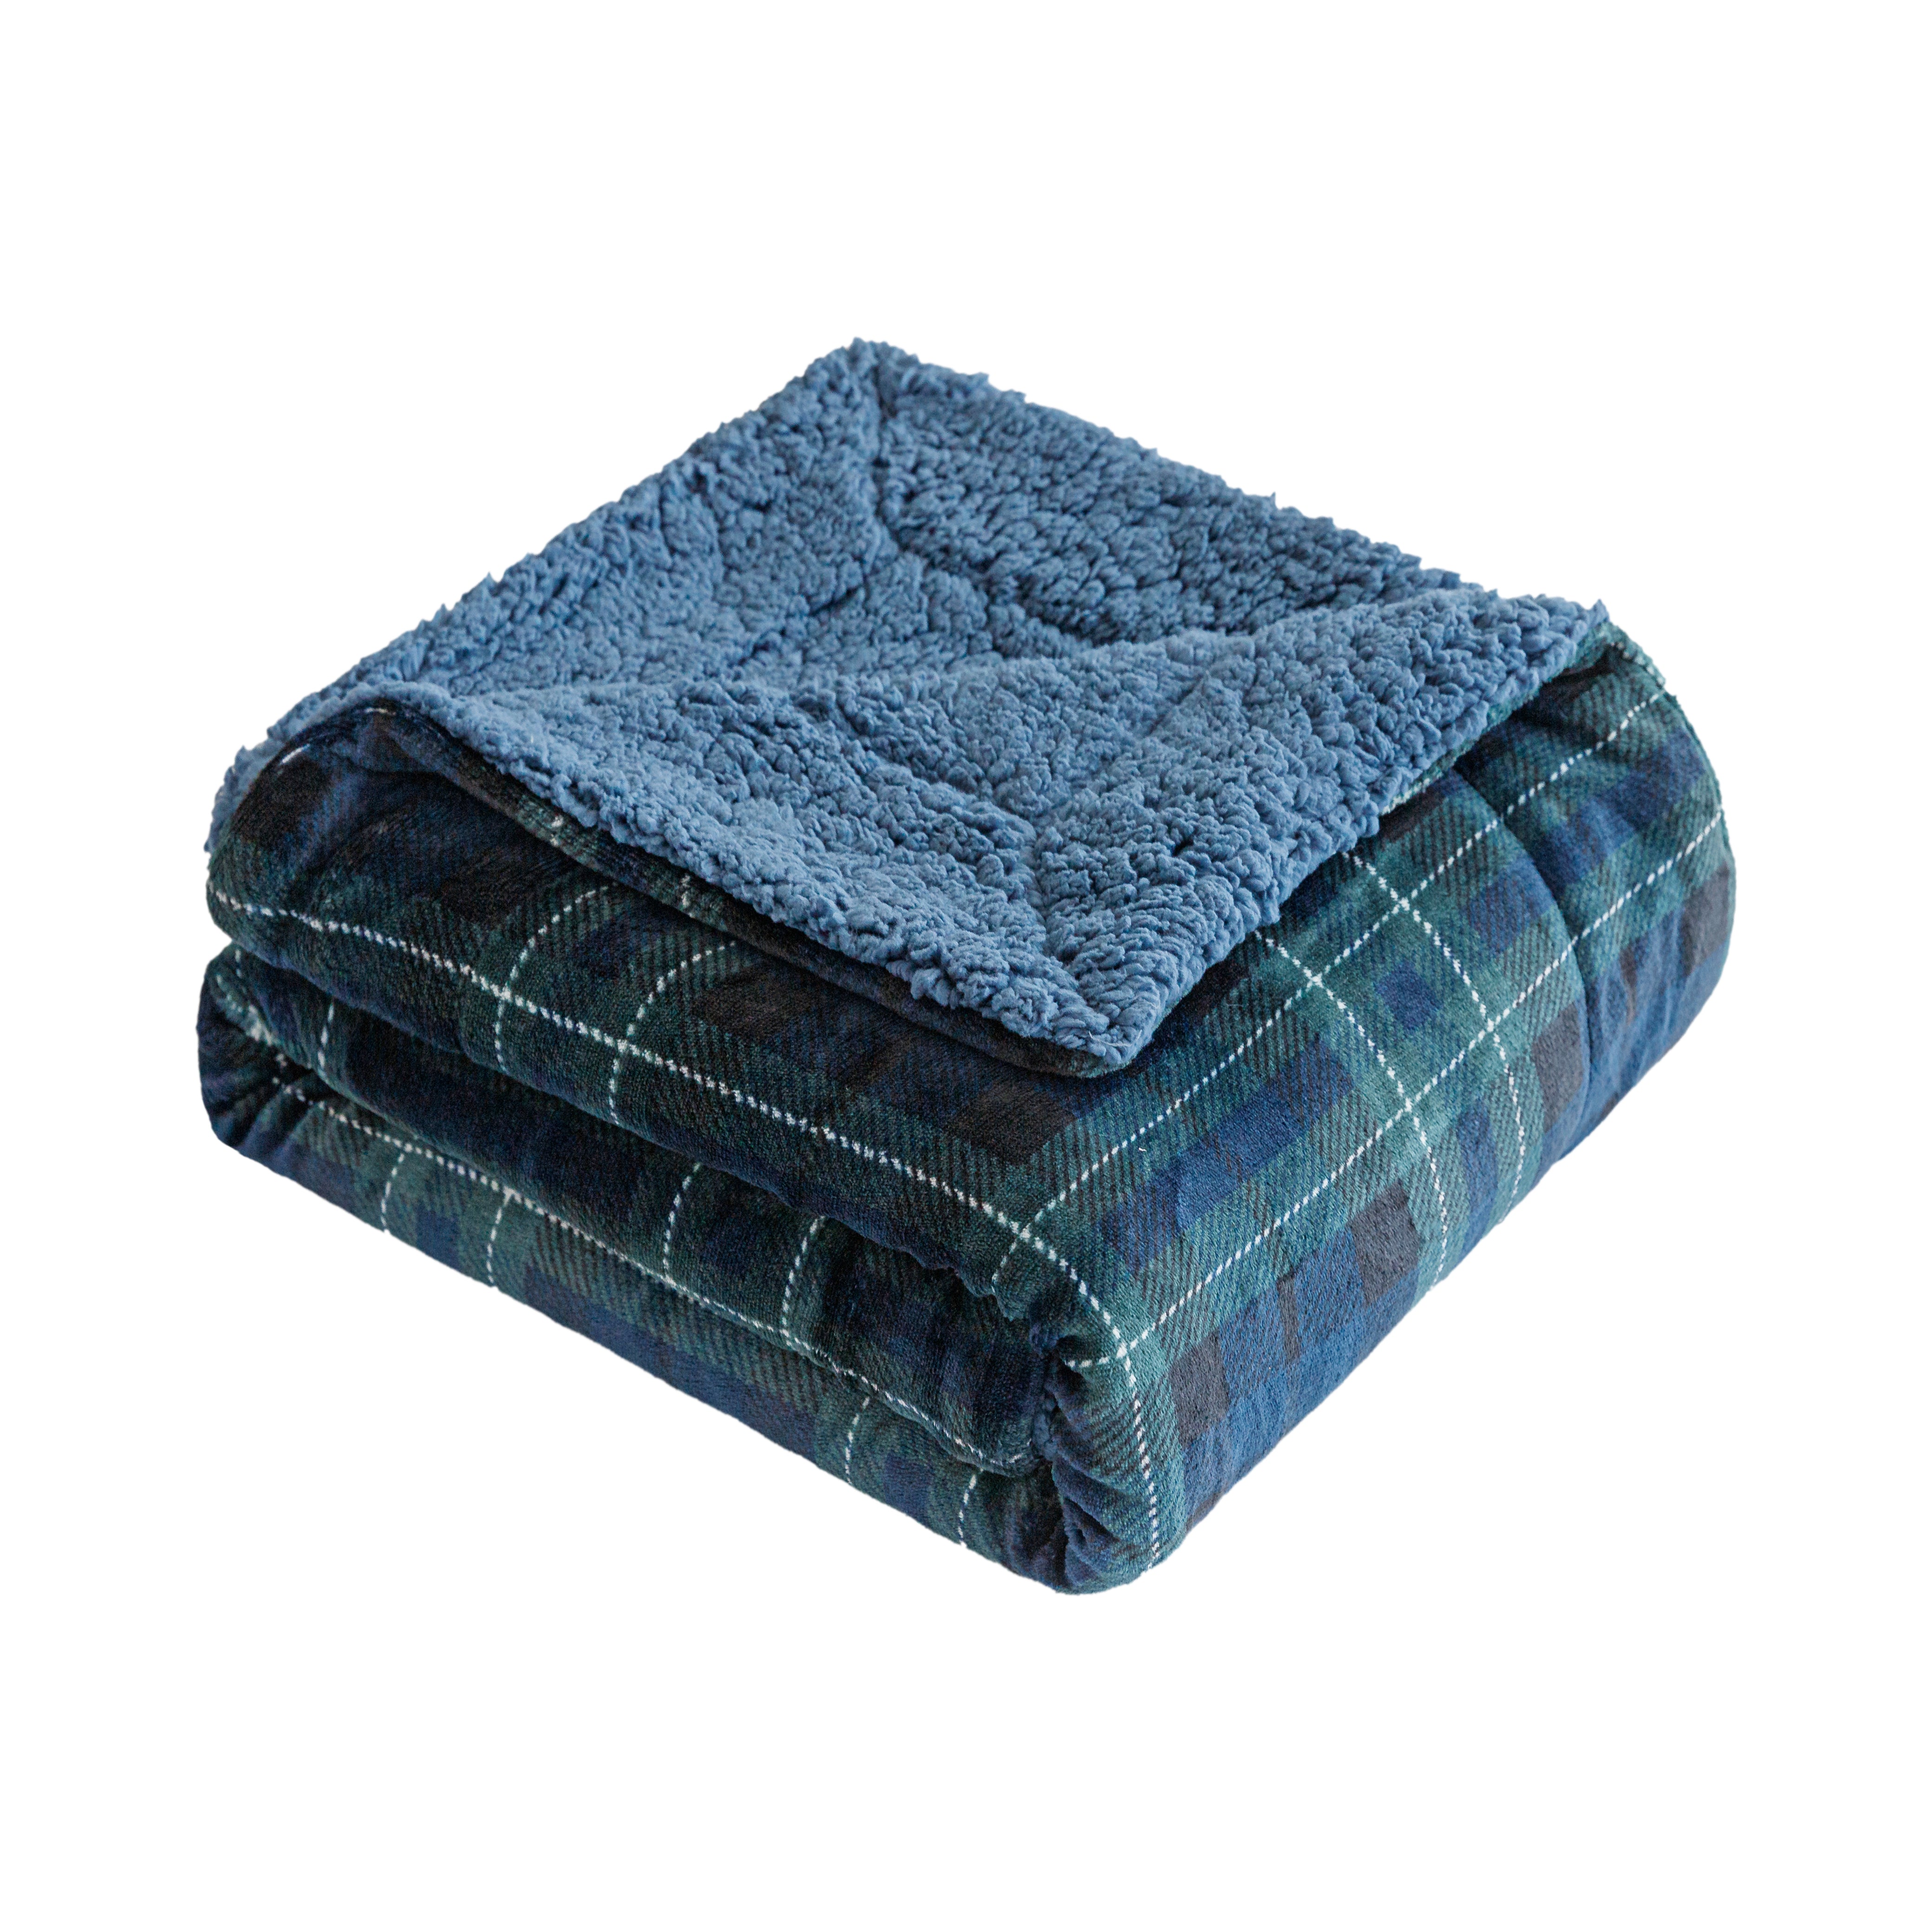 Velvet to Sherpa Throw Blanket 50 x 60 inches Blue Plaid to Navy